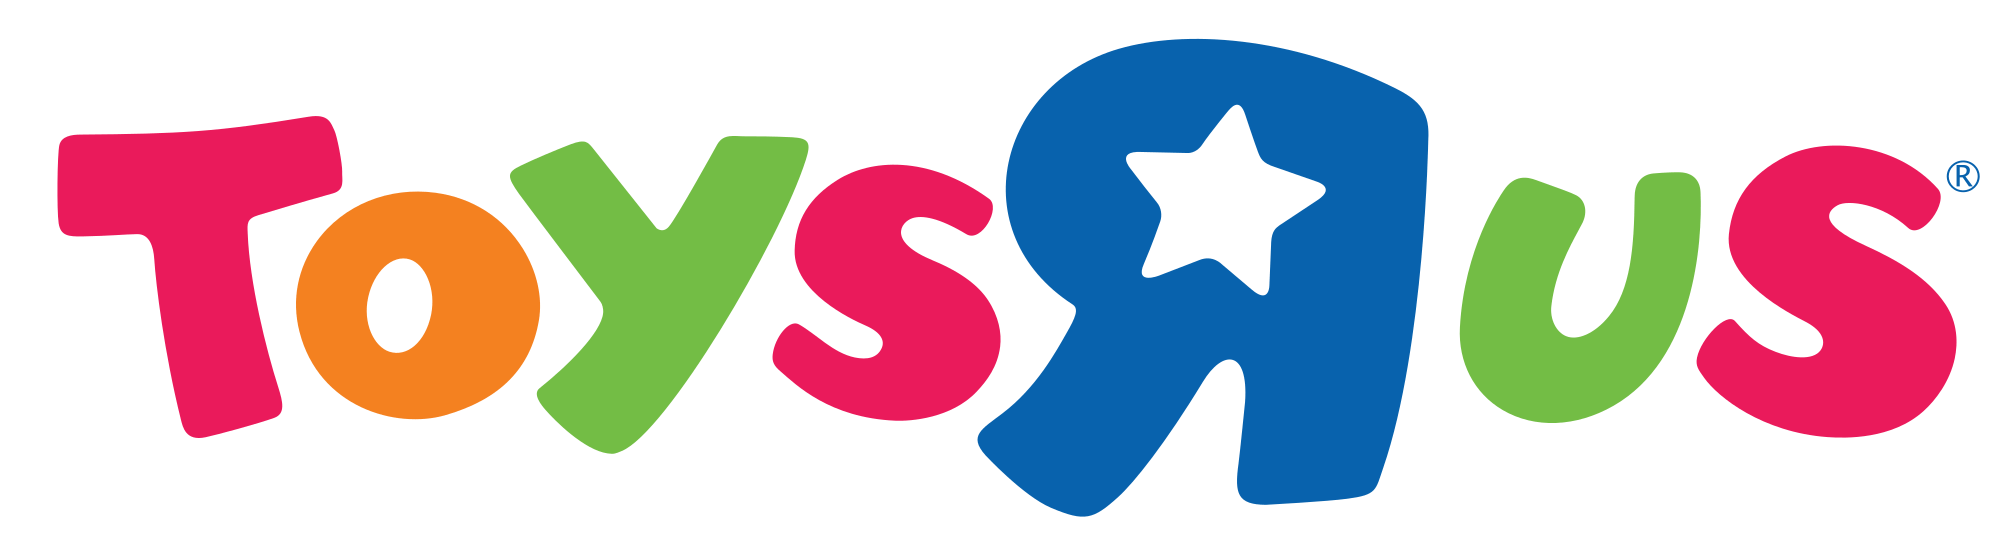 Toys Are Us Logo - File:Toys 